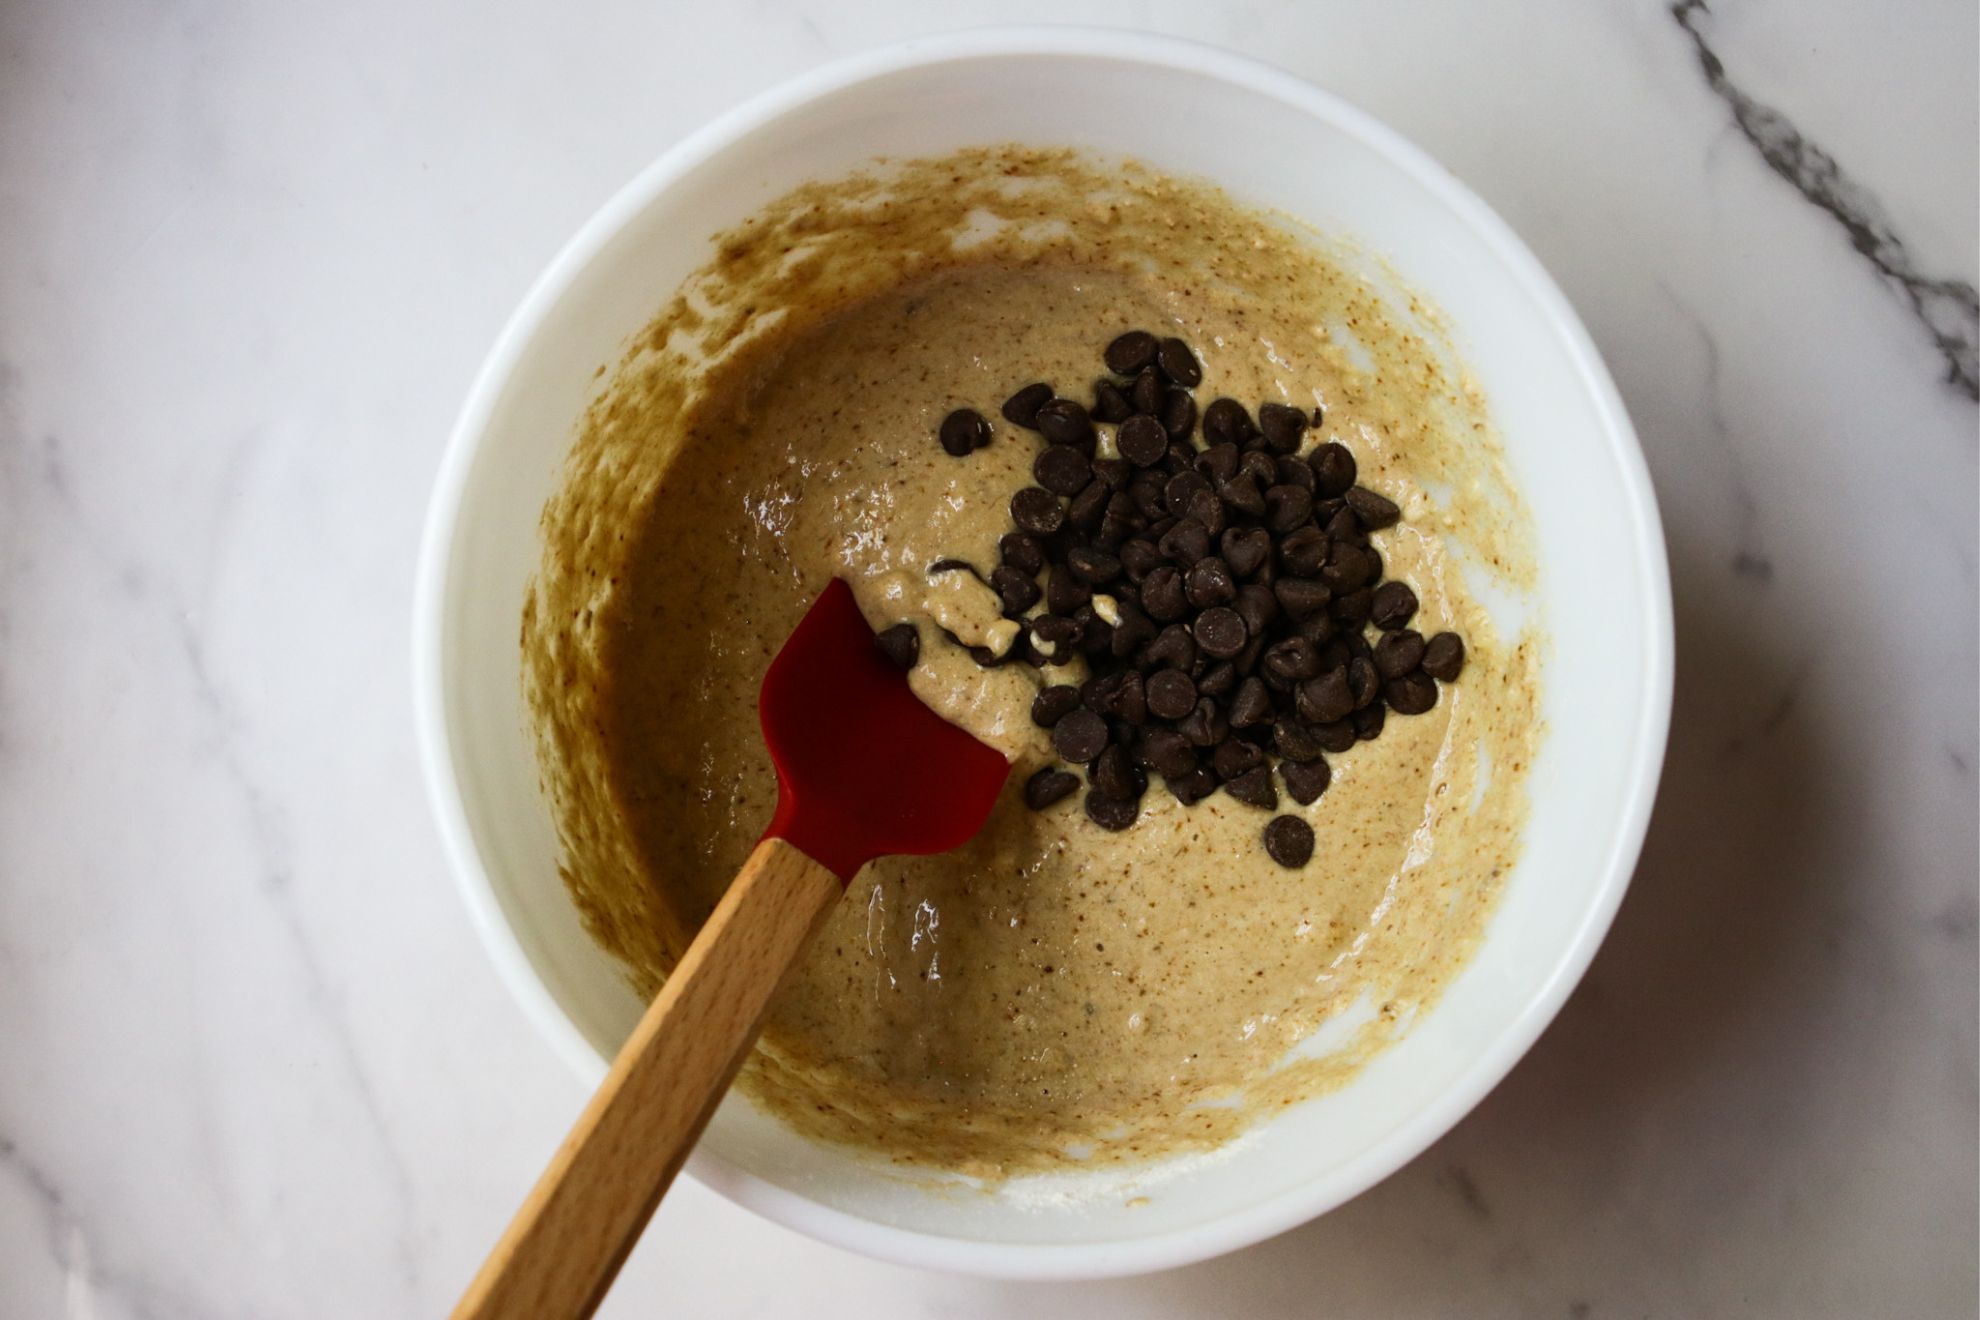 This is an overhead horizontal image of mixed batter with chocolate chips in a mound to the right side of the bowl. The bowl is white and sits on a white marble counter. A red spatula with a wooden handle is dipping into the batter and leaning against the side of the bowl, pointing to the bottom left of the image.